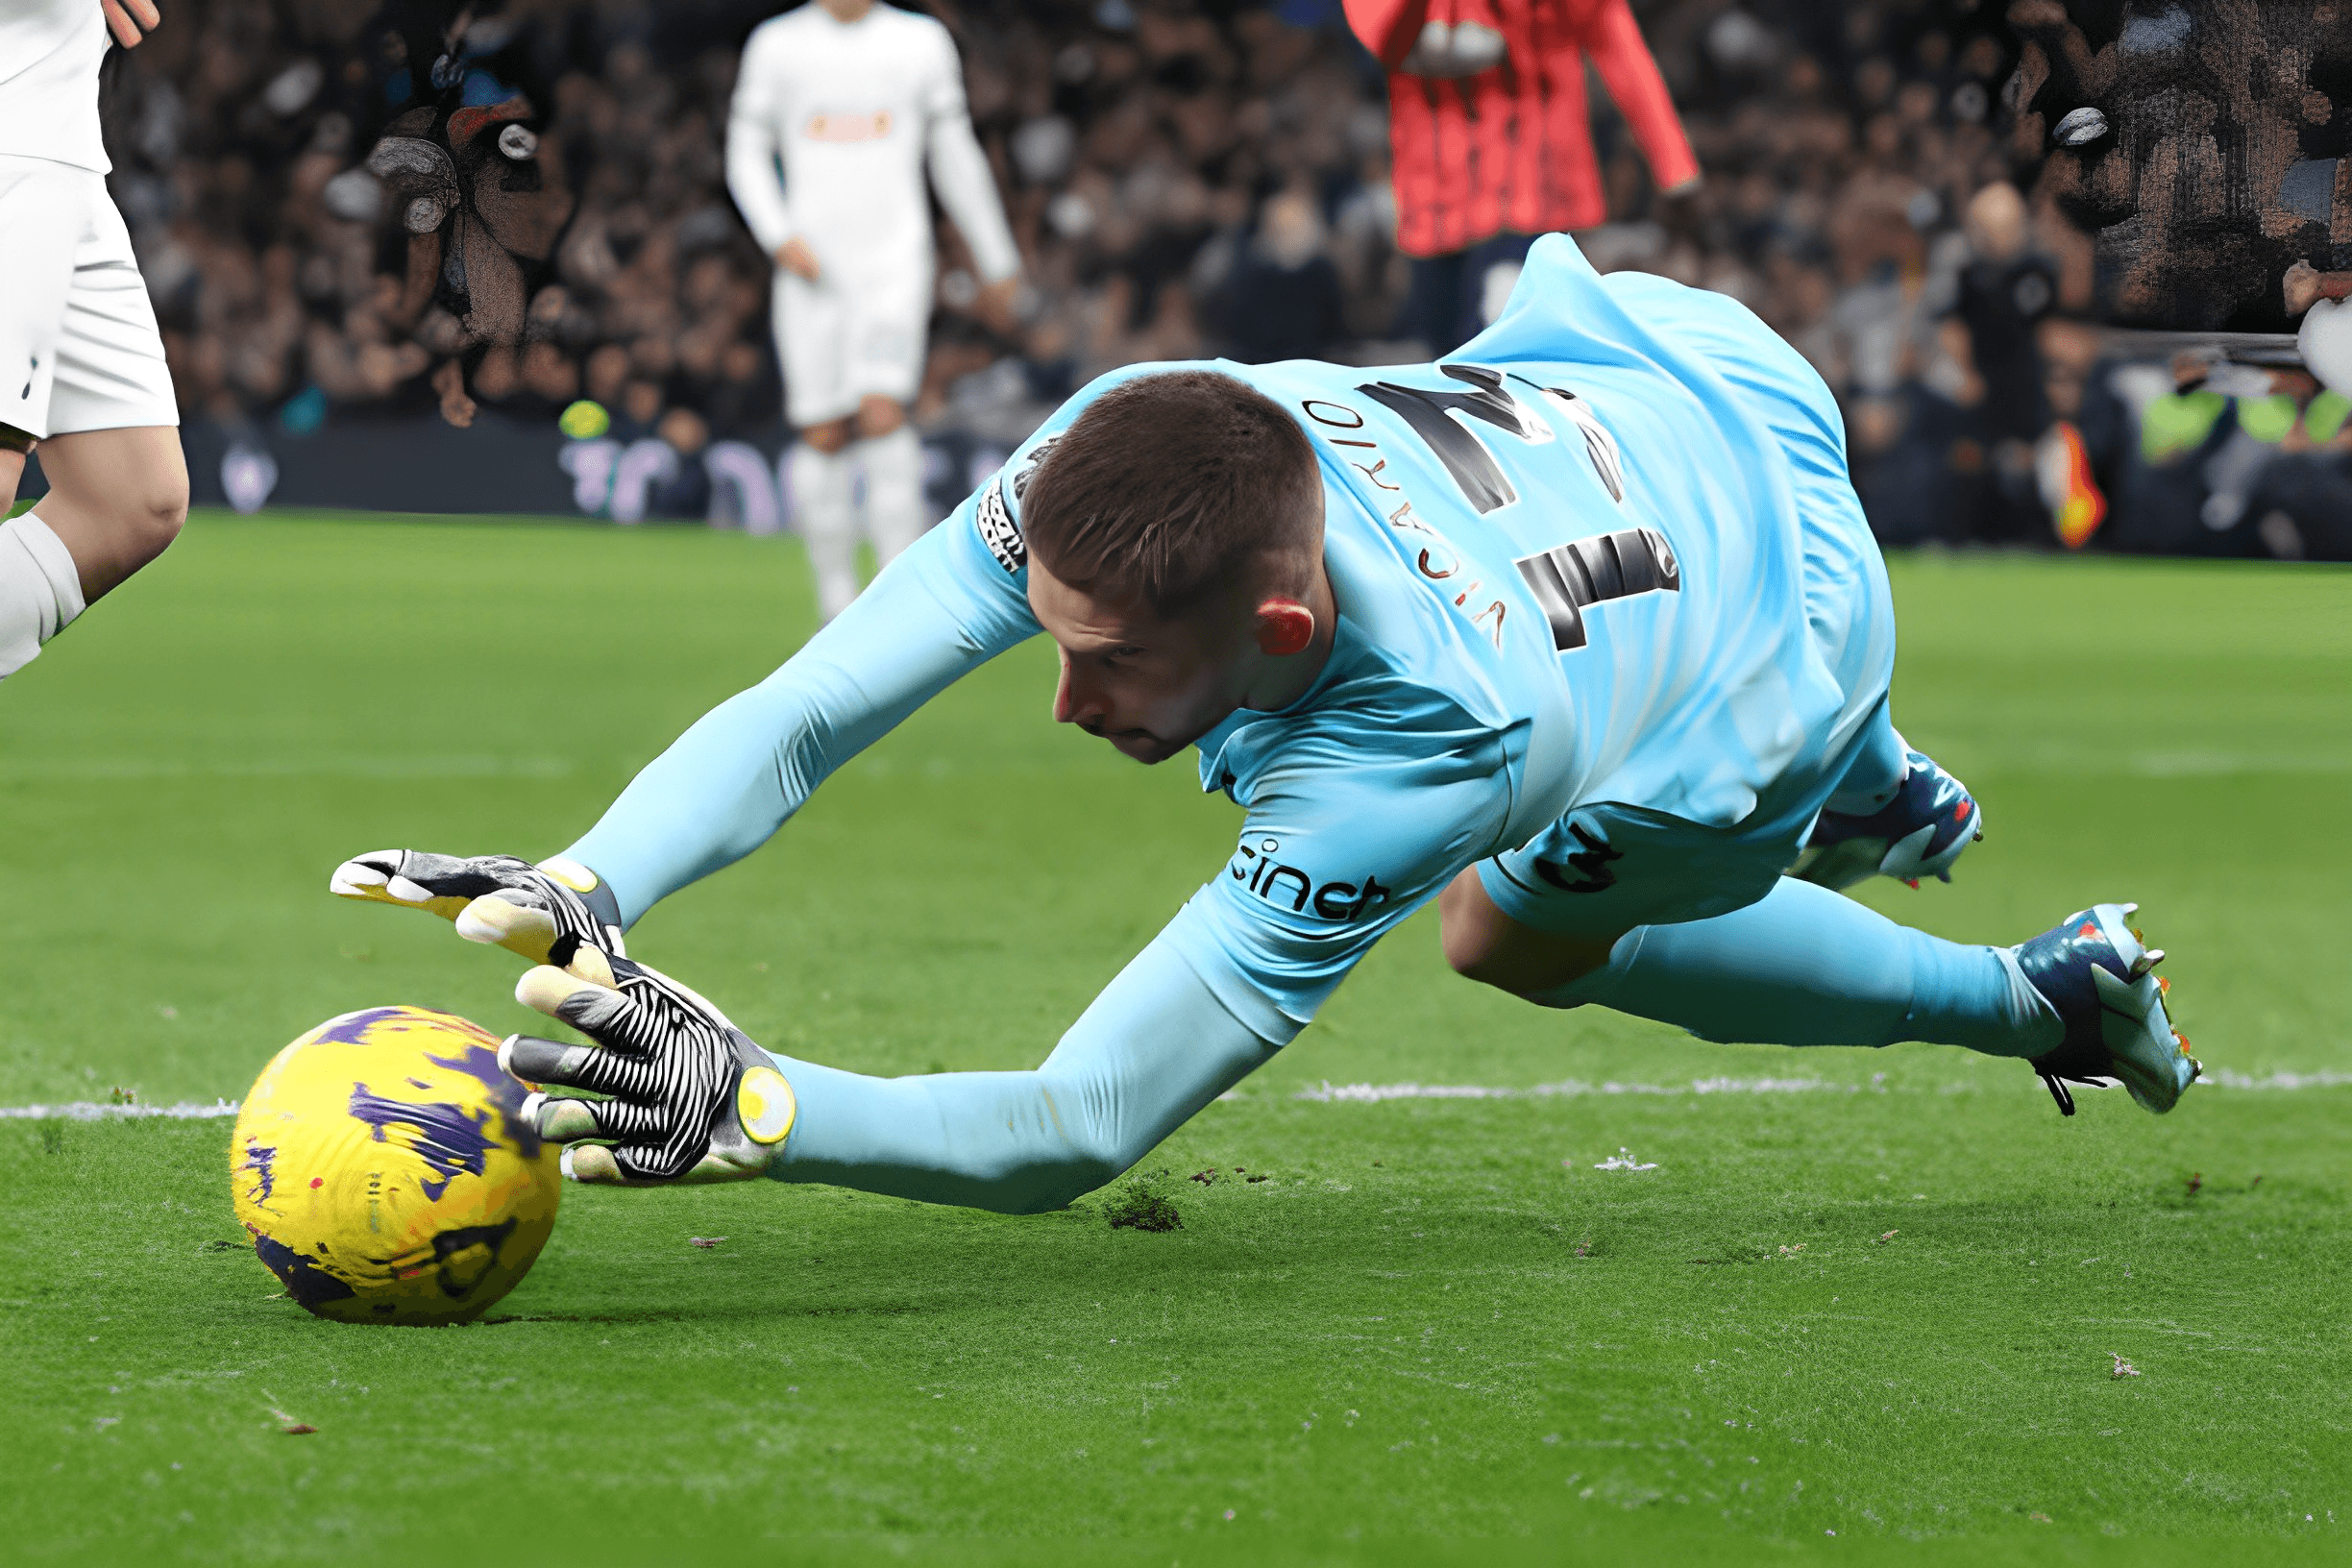 Tottenham Hotspur goalkeeper Vicario dives to save the ball in a Premier League match at Tottenham Hotspur Stadium in London, England.